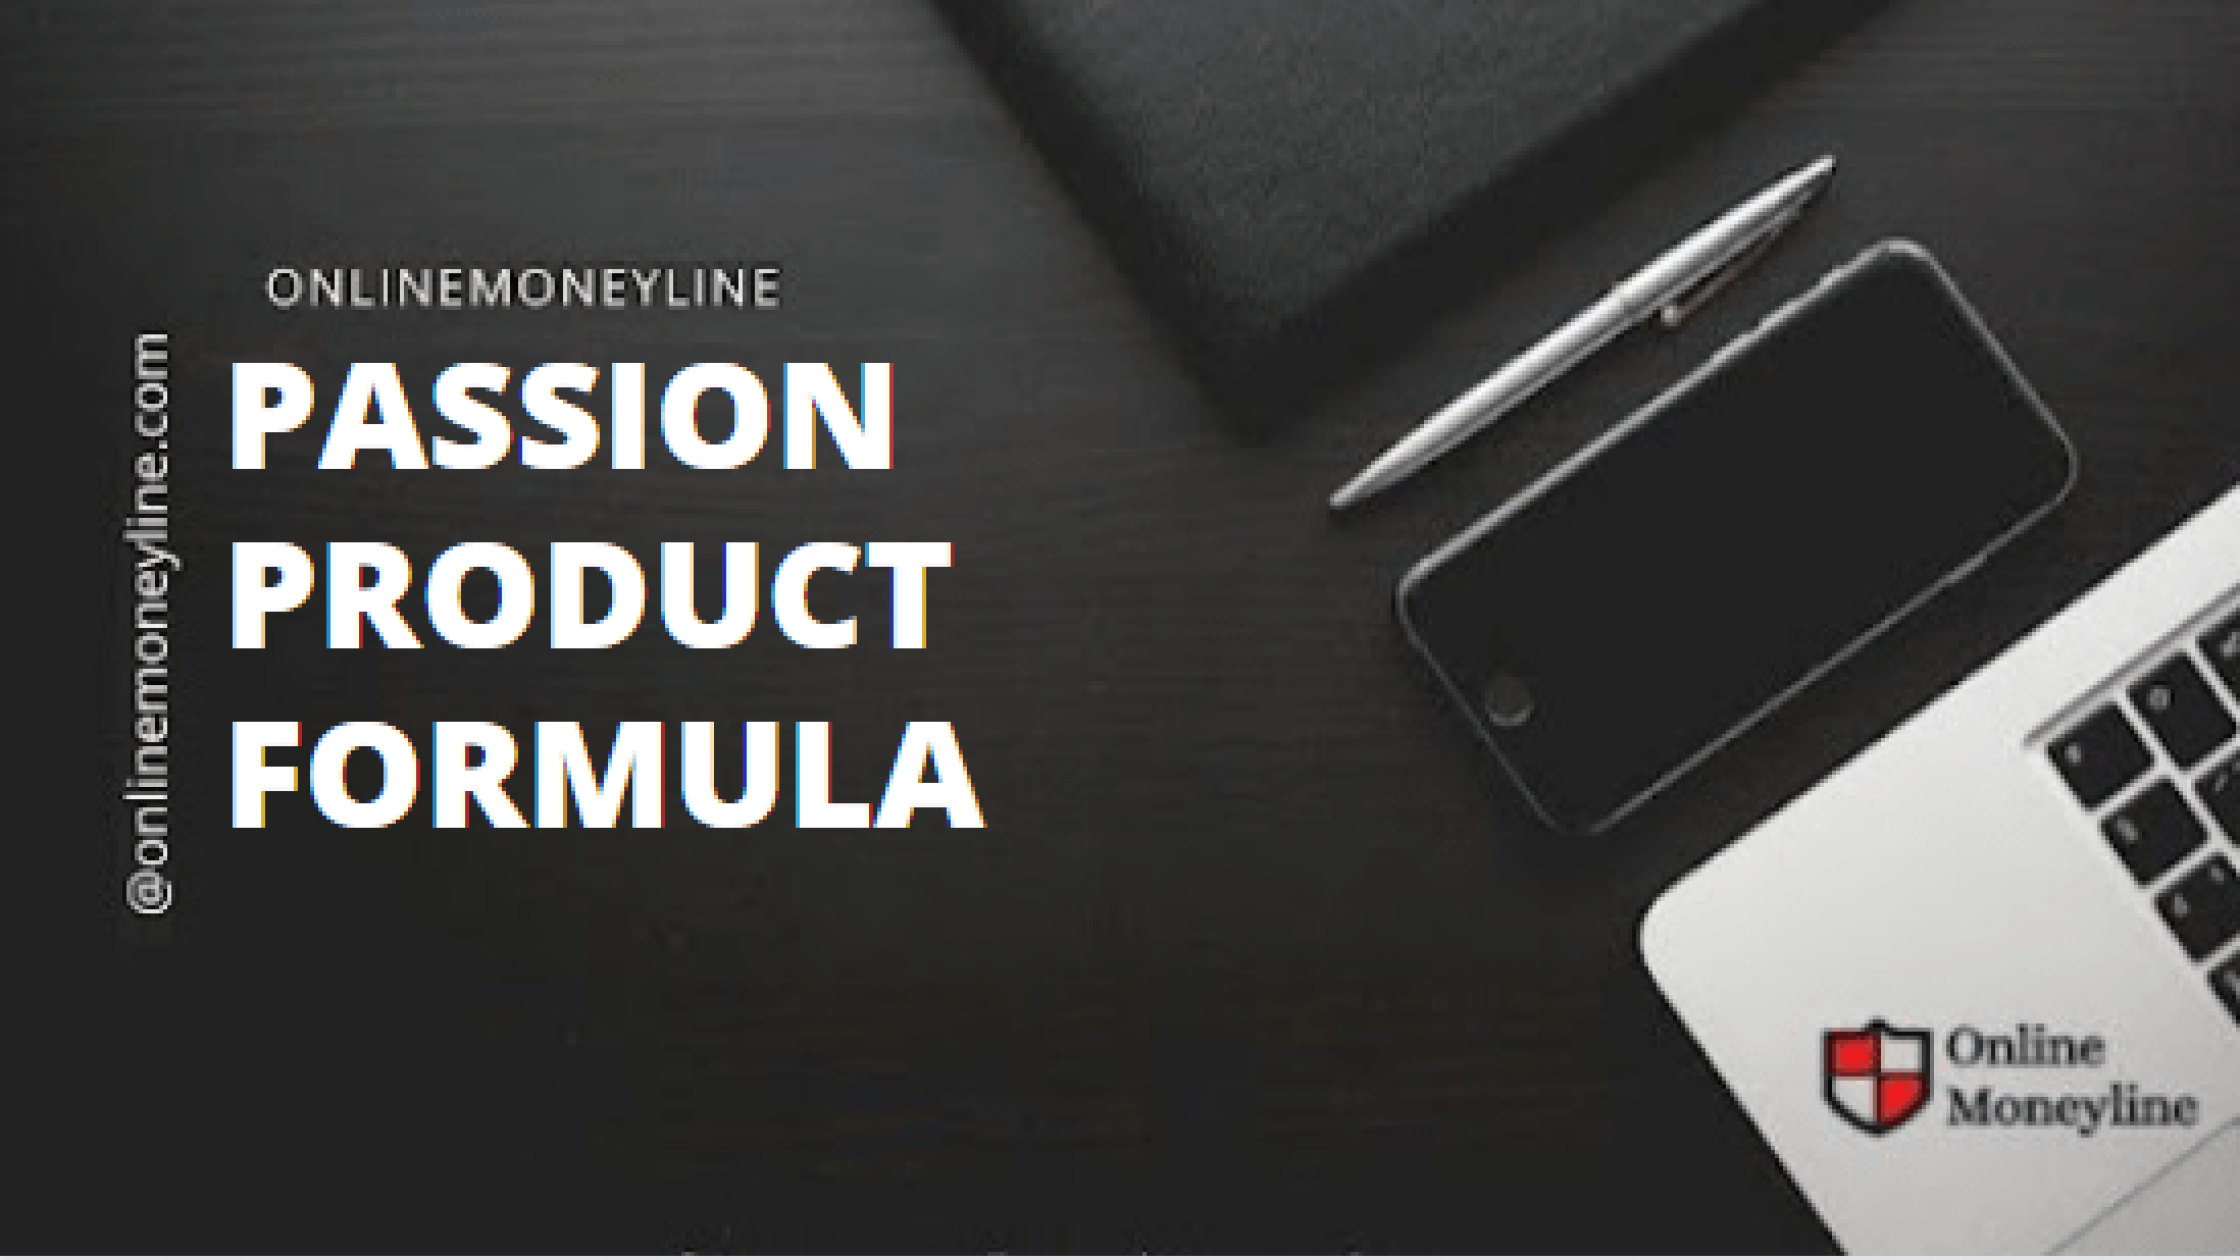 Passion Product Formula Overview